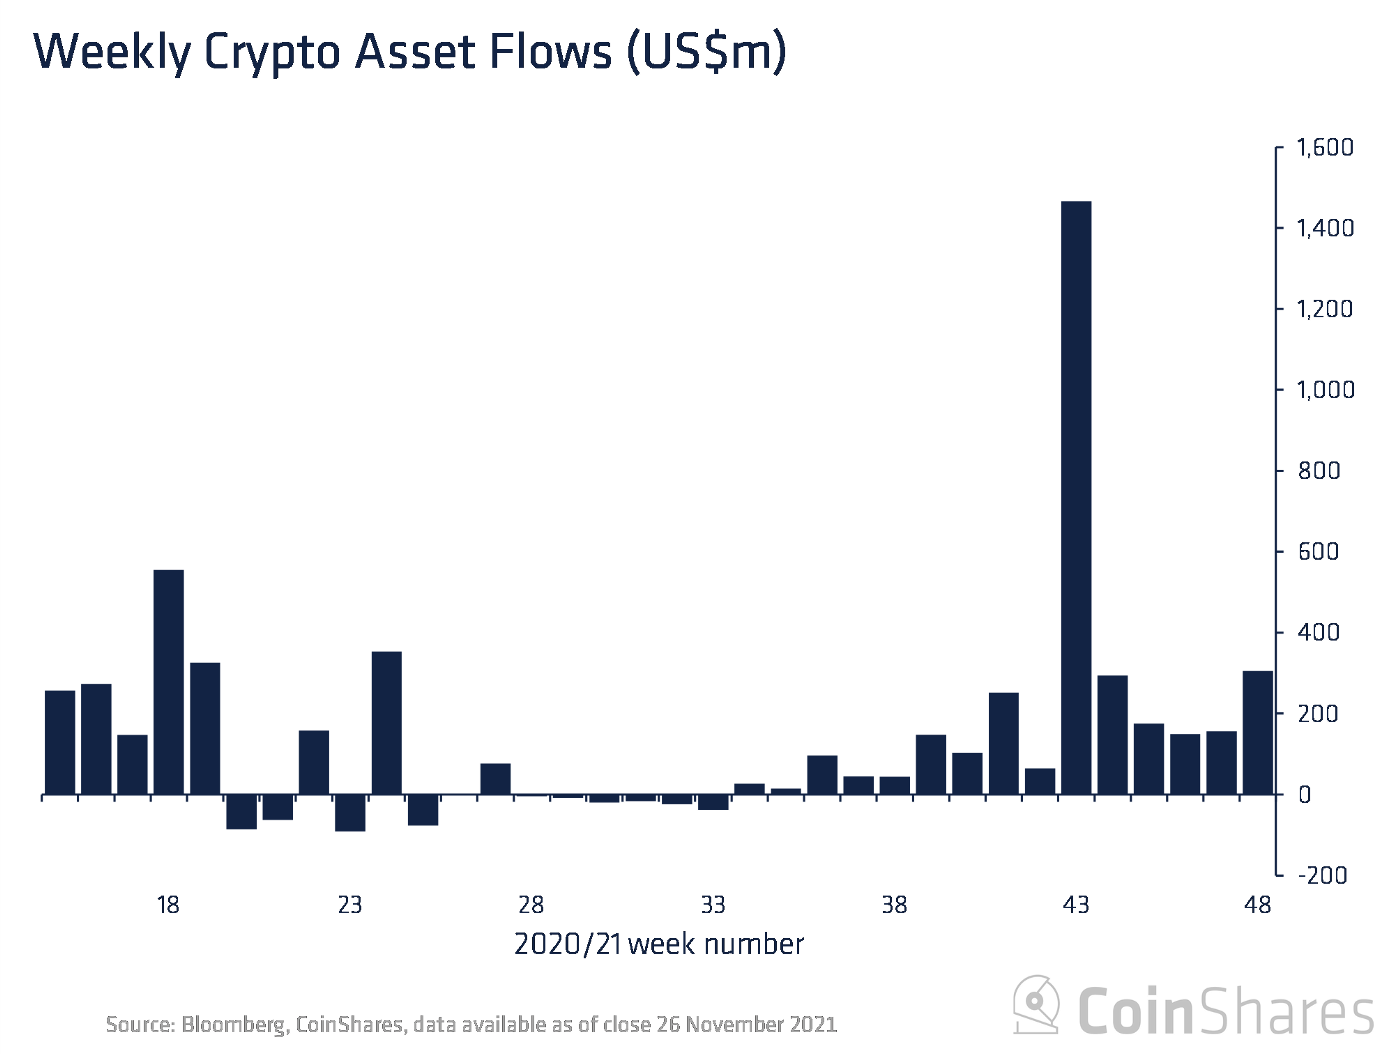 Investments in cryptocurrency funds are growing 15 weeks in a row